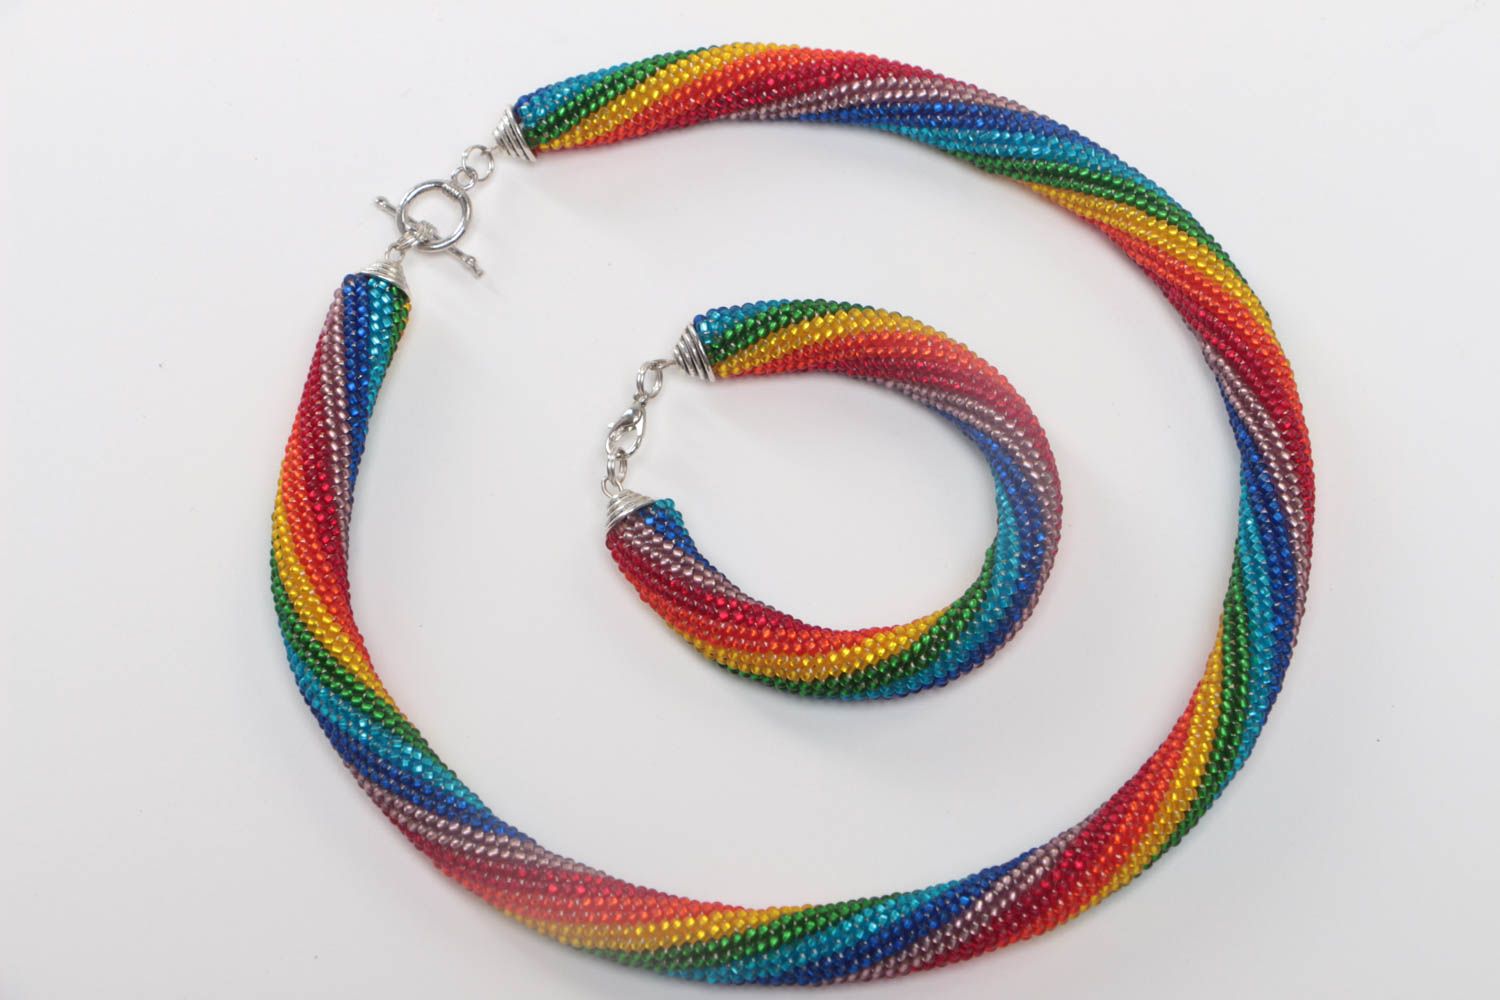 Handmade beaded cord jewelry set of rainbow coloring necklace and wrist bracelet photo 2